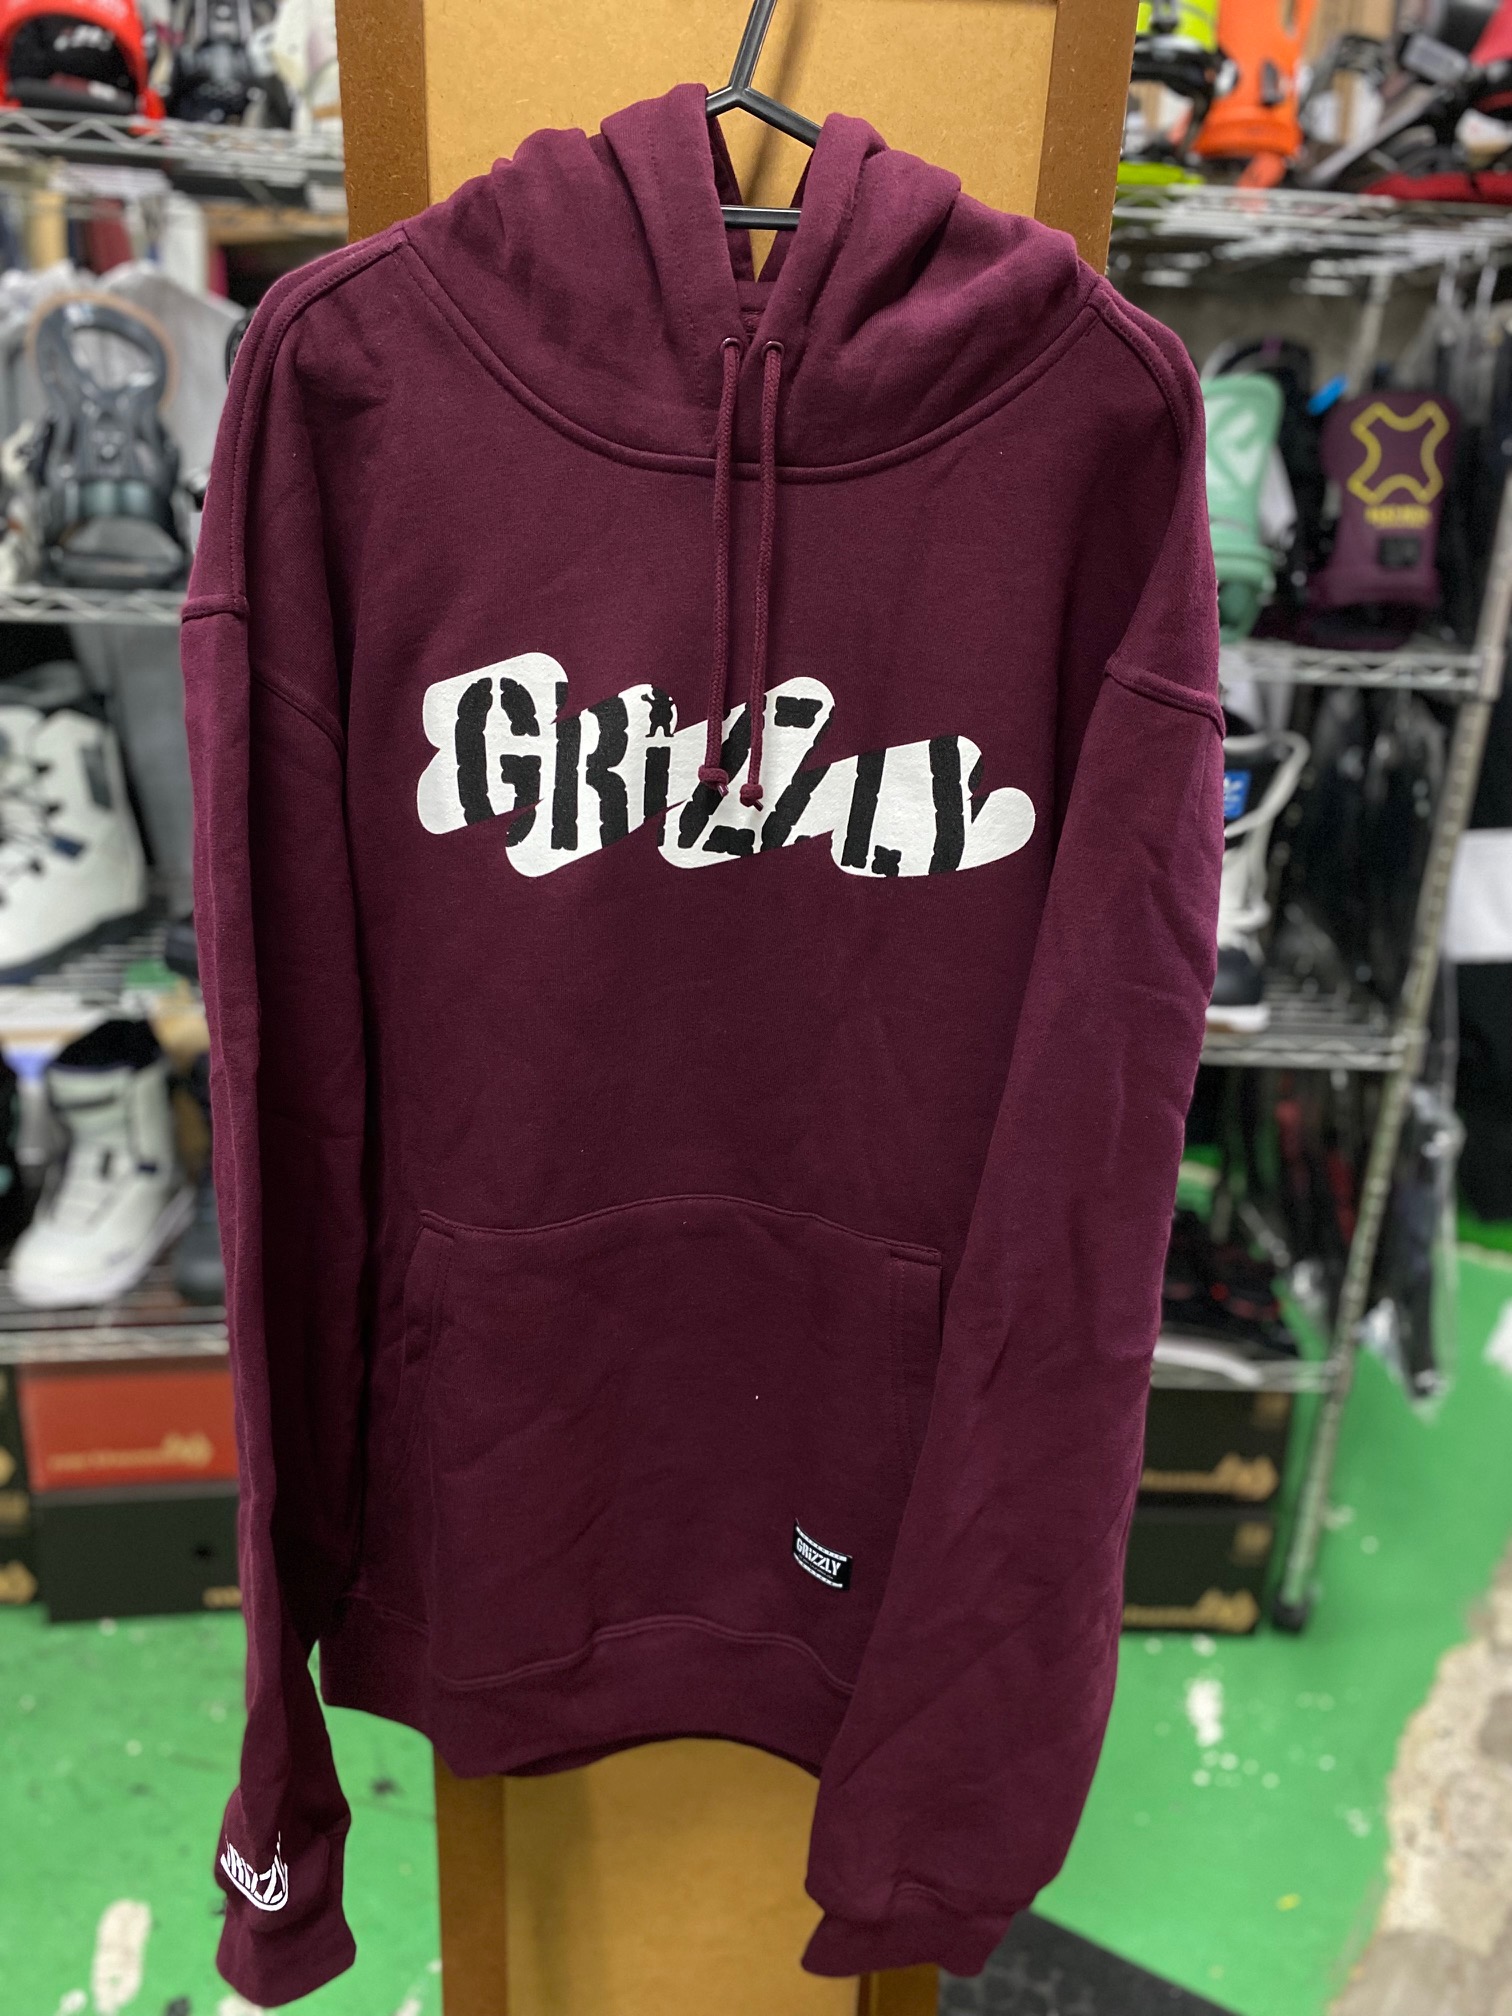 GRIZZLY 2021Holiday 入荷しました！！